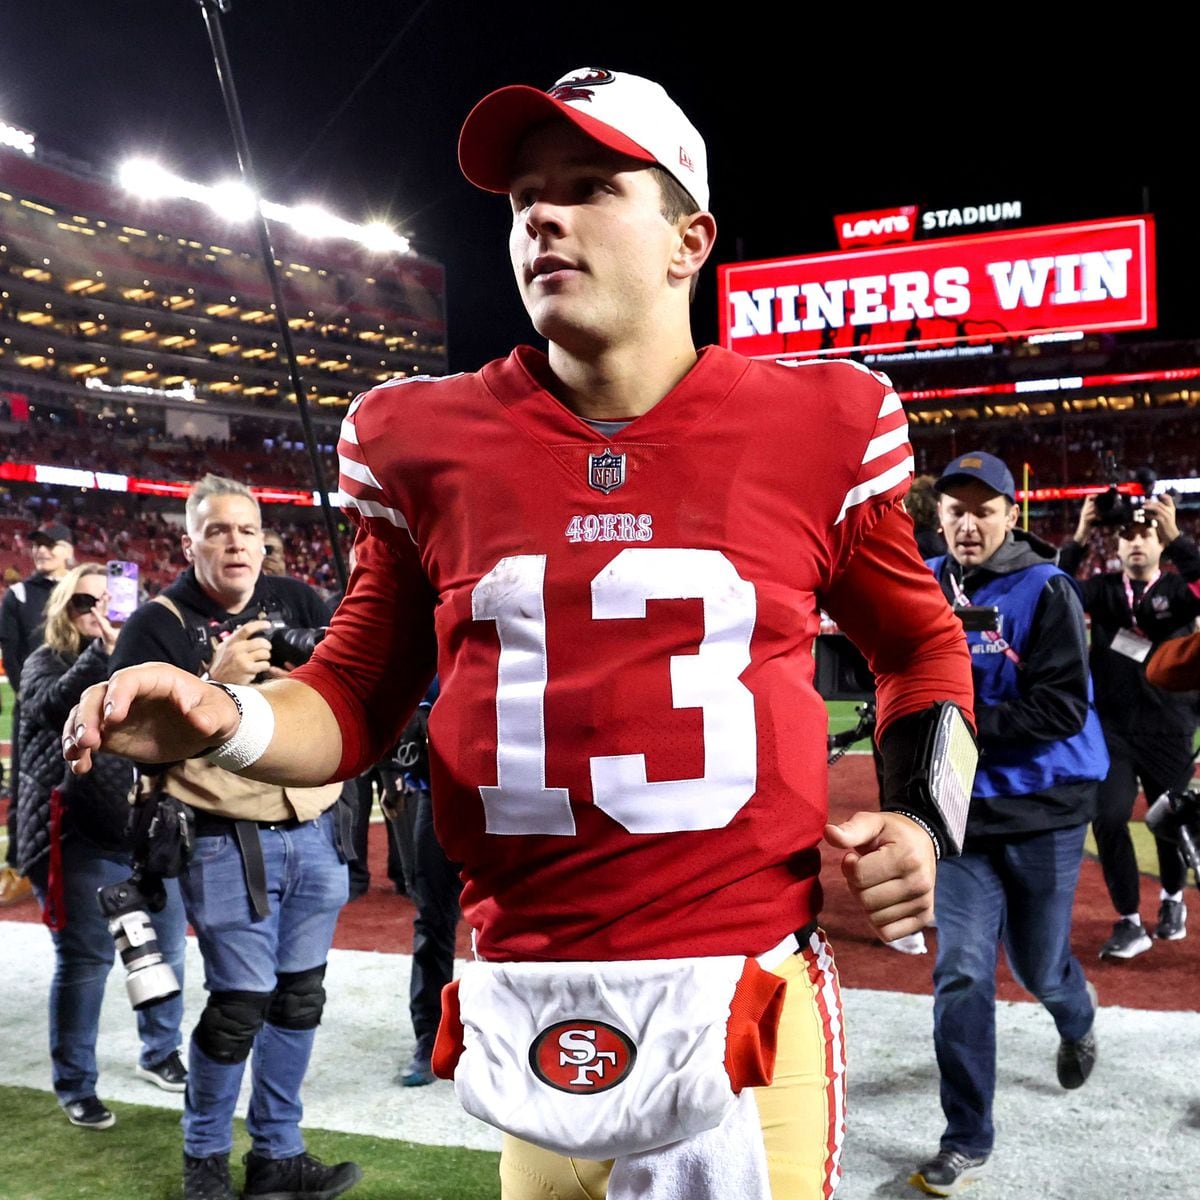 NFL conference championship preview: Mr. Irrelevant takes on MVP